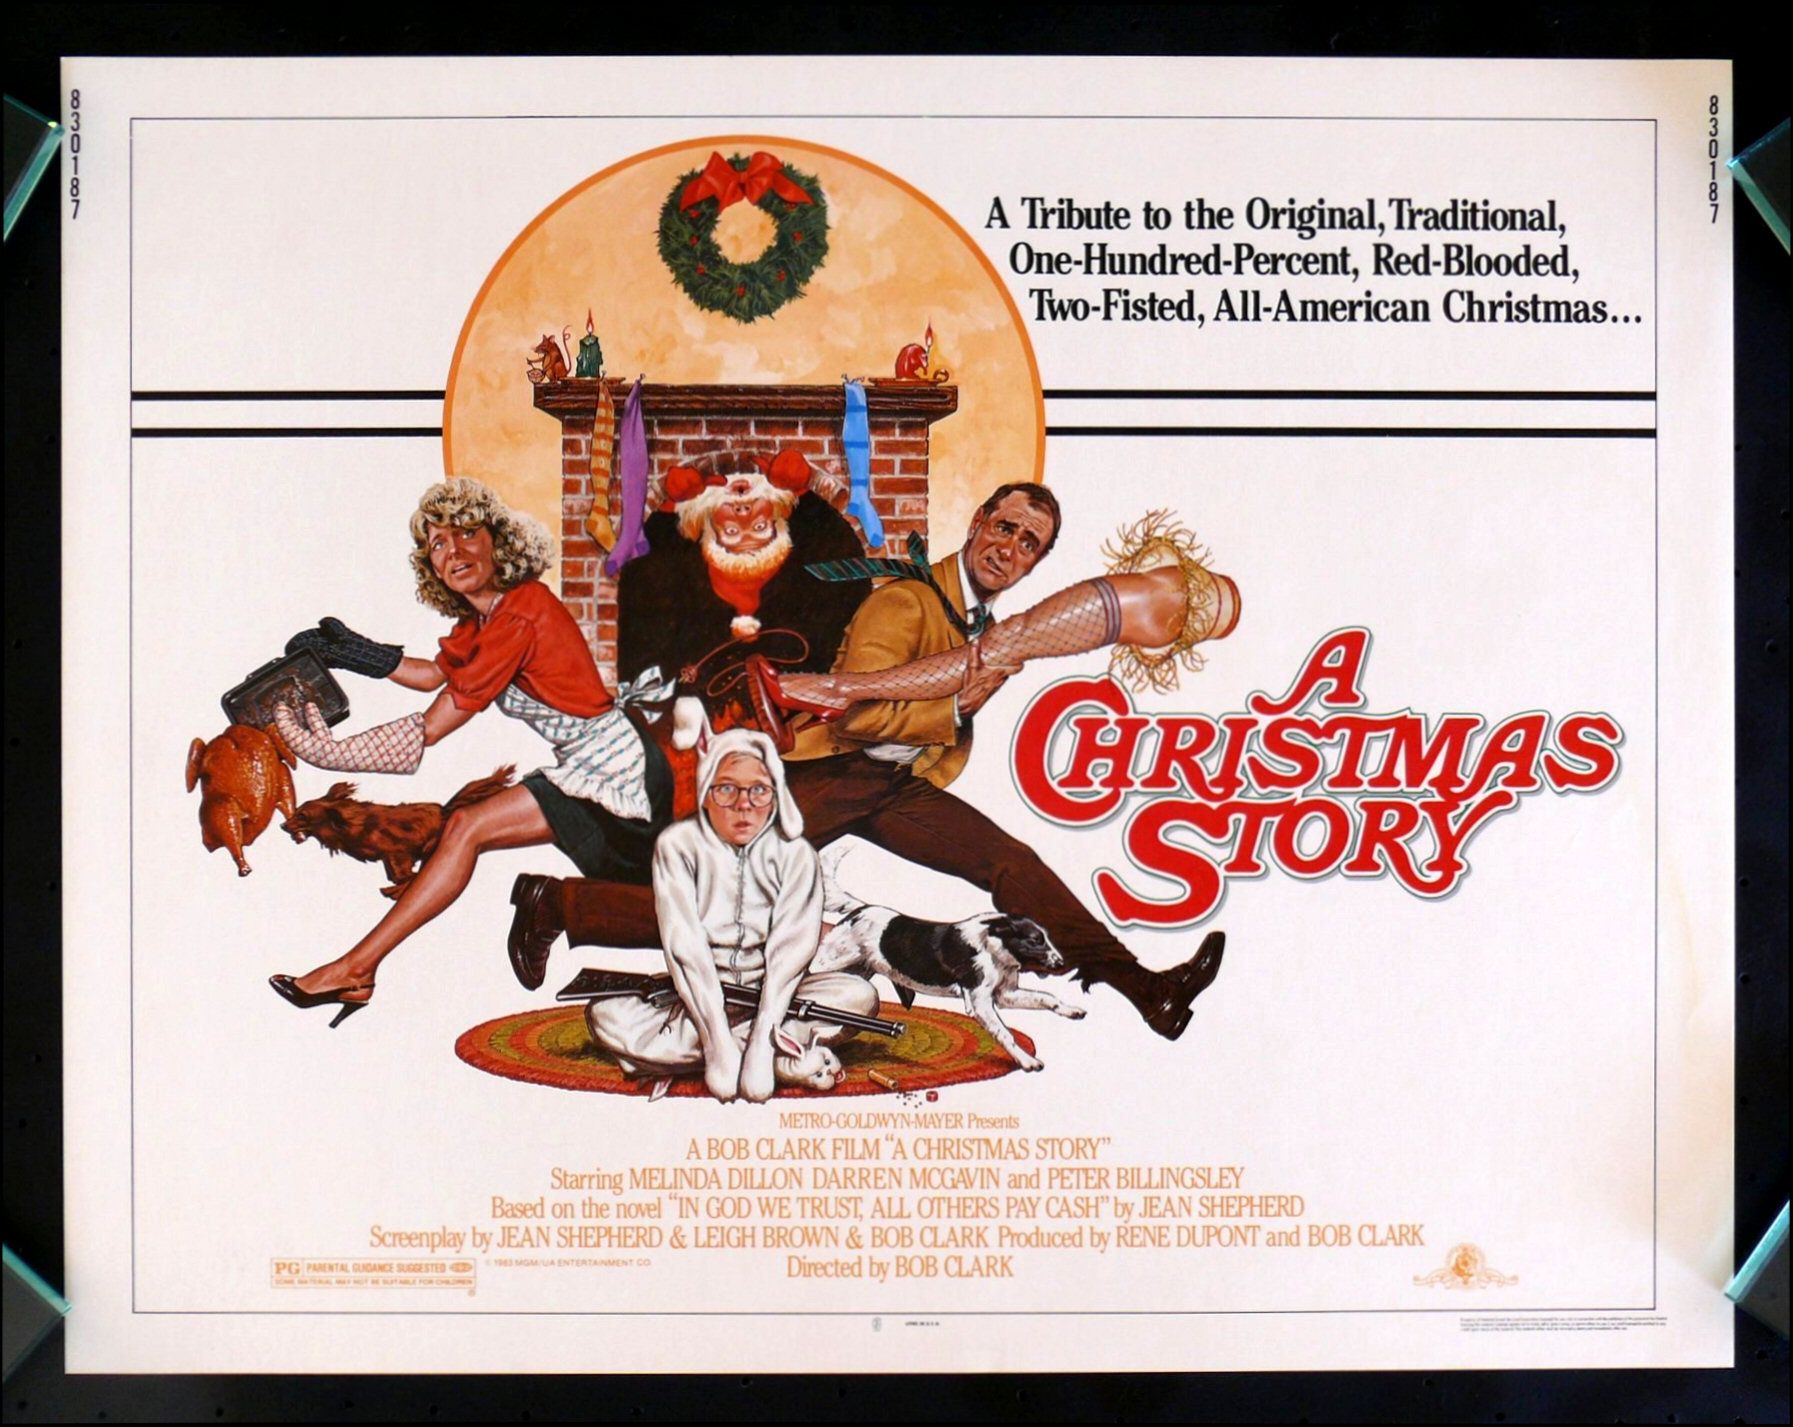 How Well Do You Remember A Christmas Story? | PlayBuzz